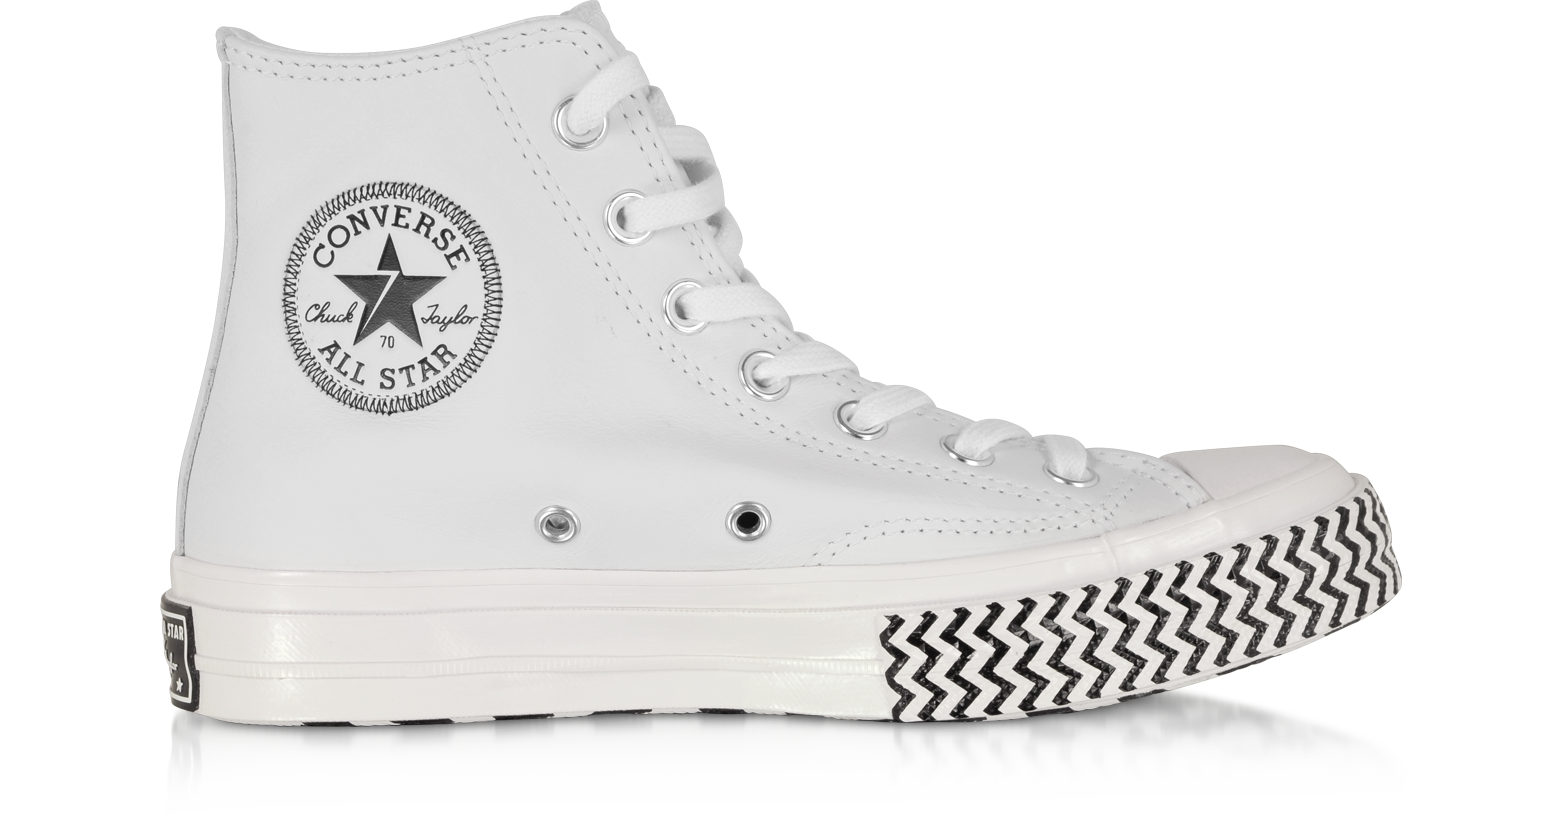 white converse limited edition